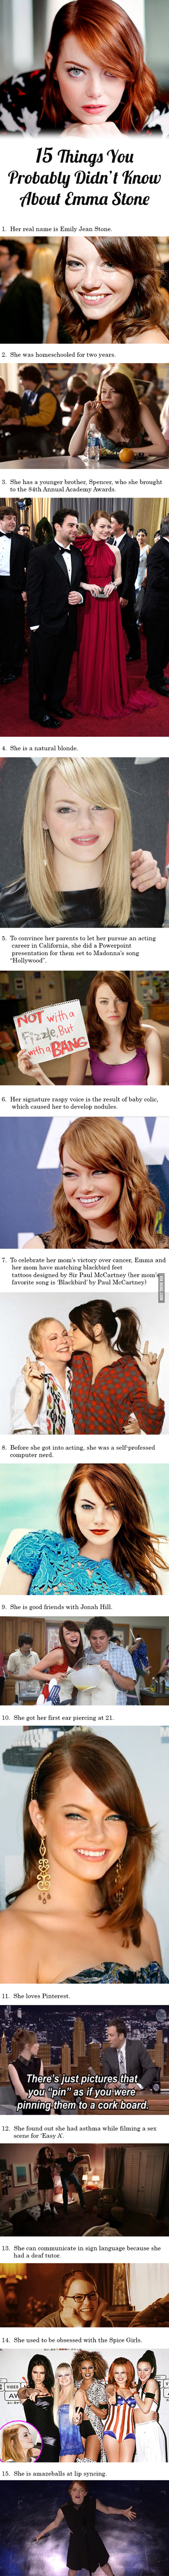 15 things you may not know about my Queen.